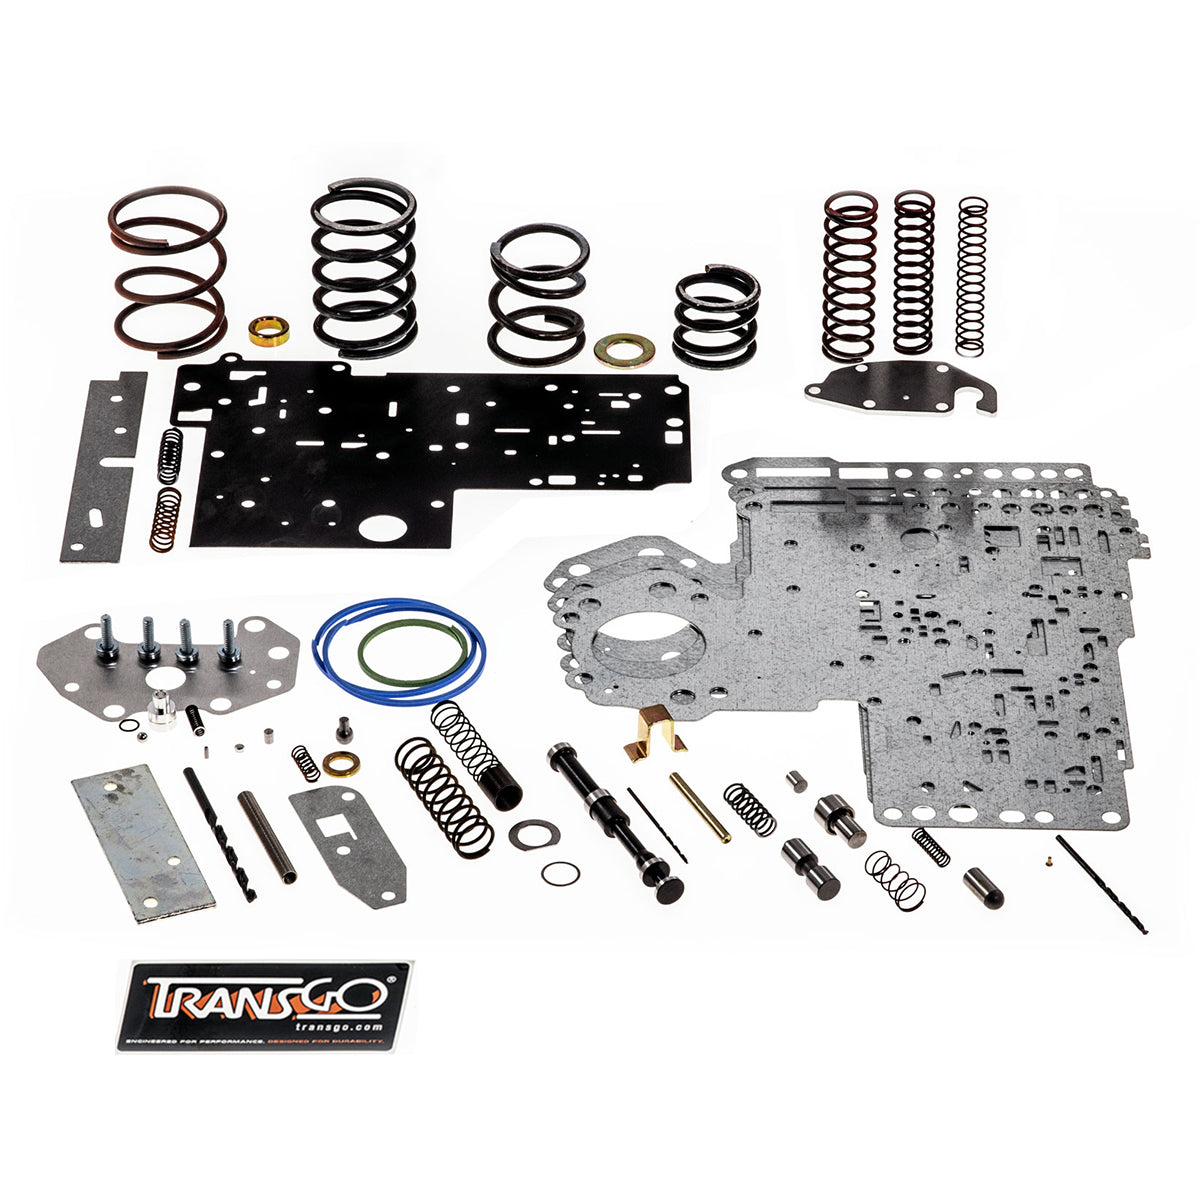 TFRE-PRO TransGO Reprogramming Kit™ For extreme duty work trucks and performance modified trucks Hell On Wheels Ltd Canada